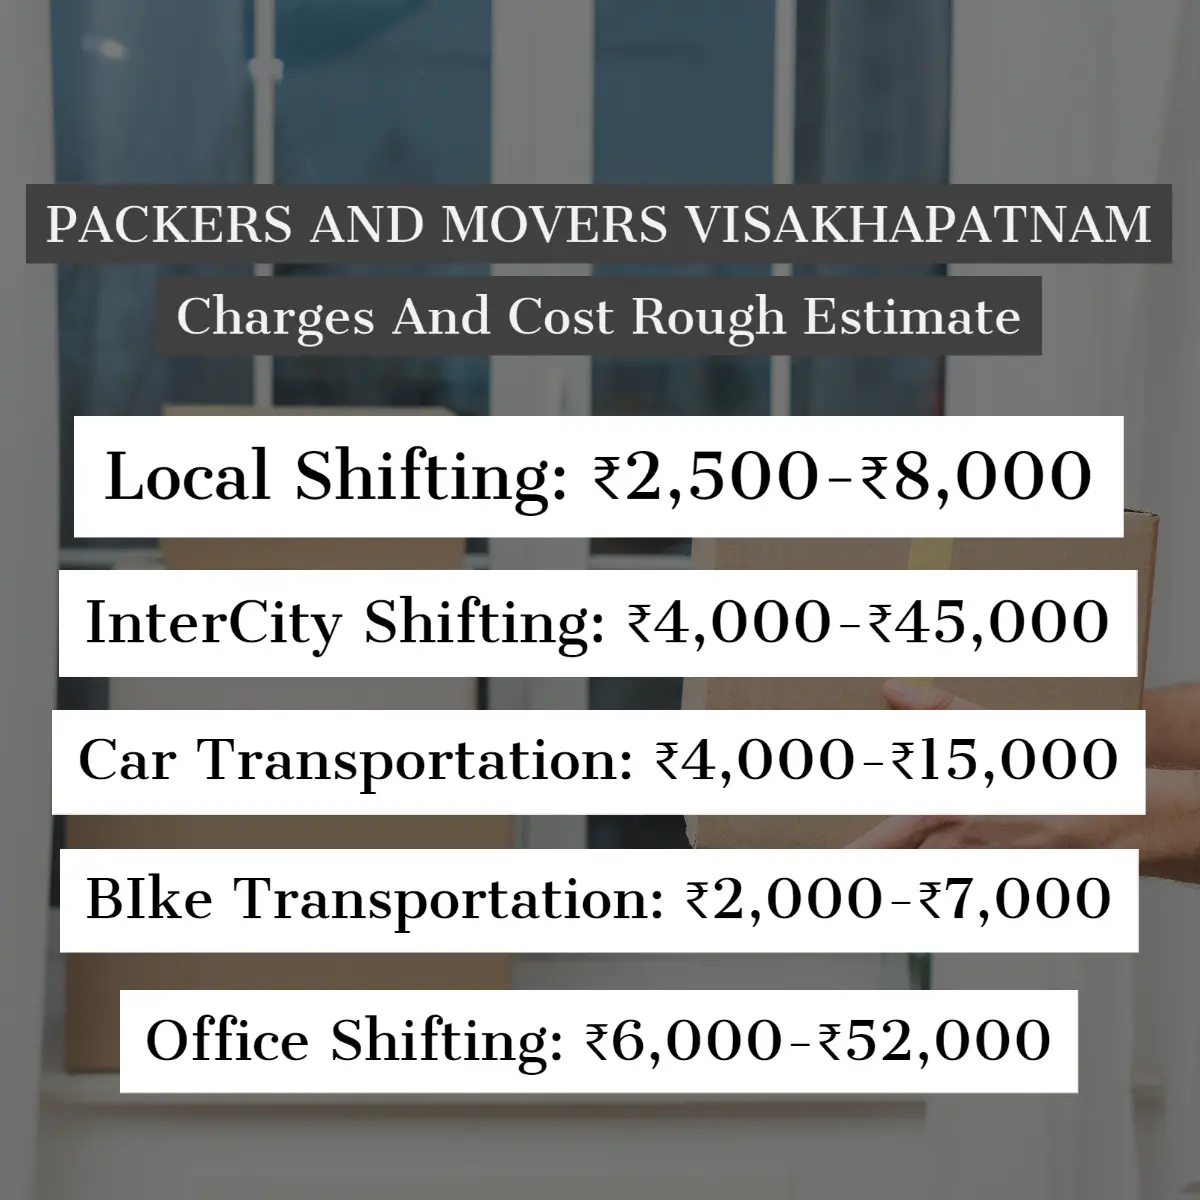 Packers and Movers Visakhapatnam Charges